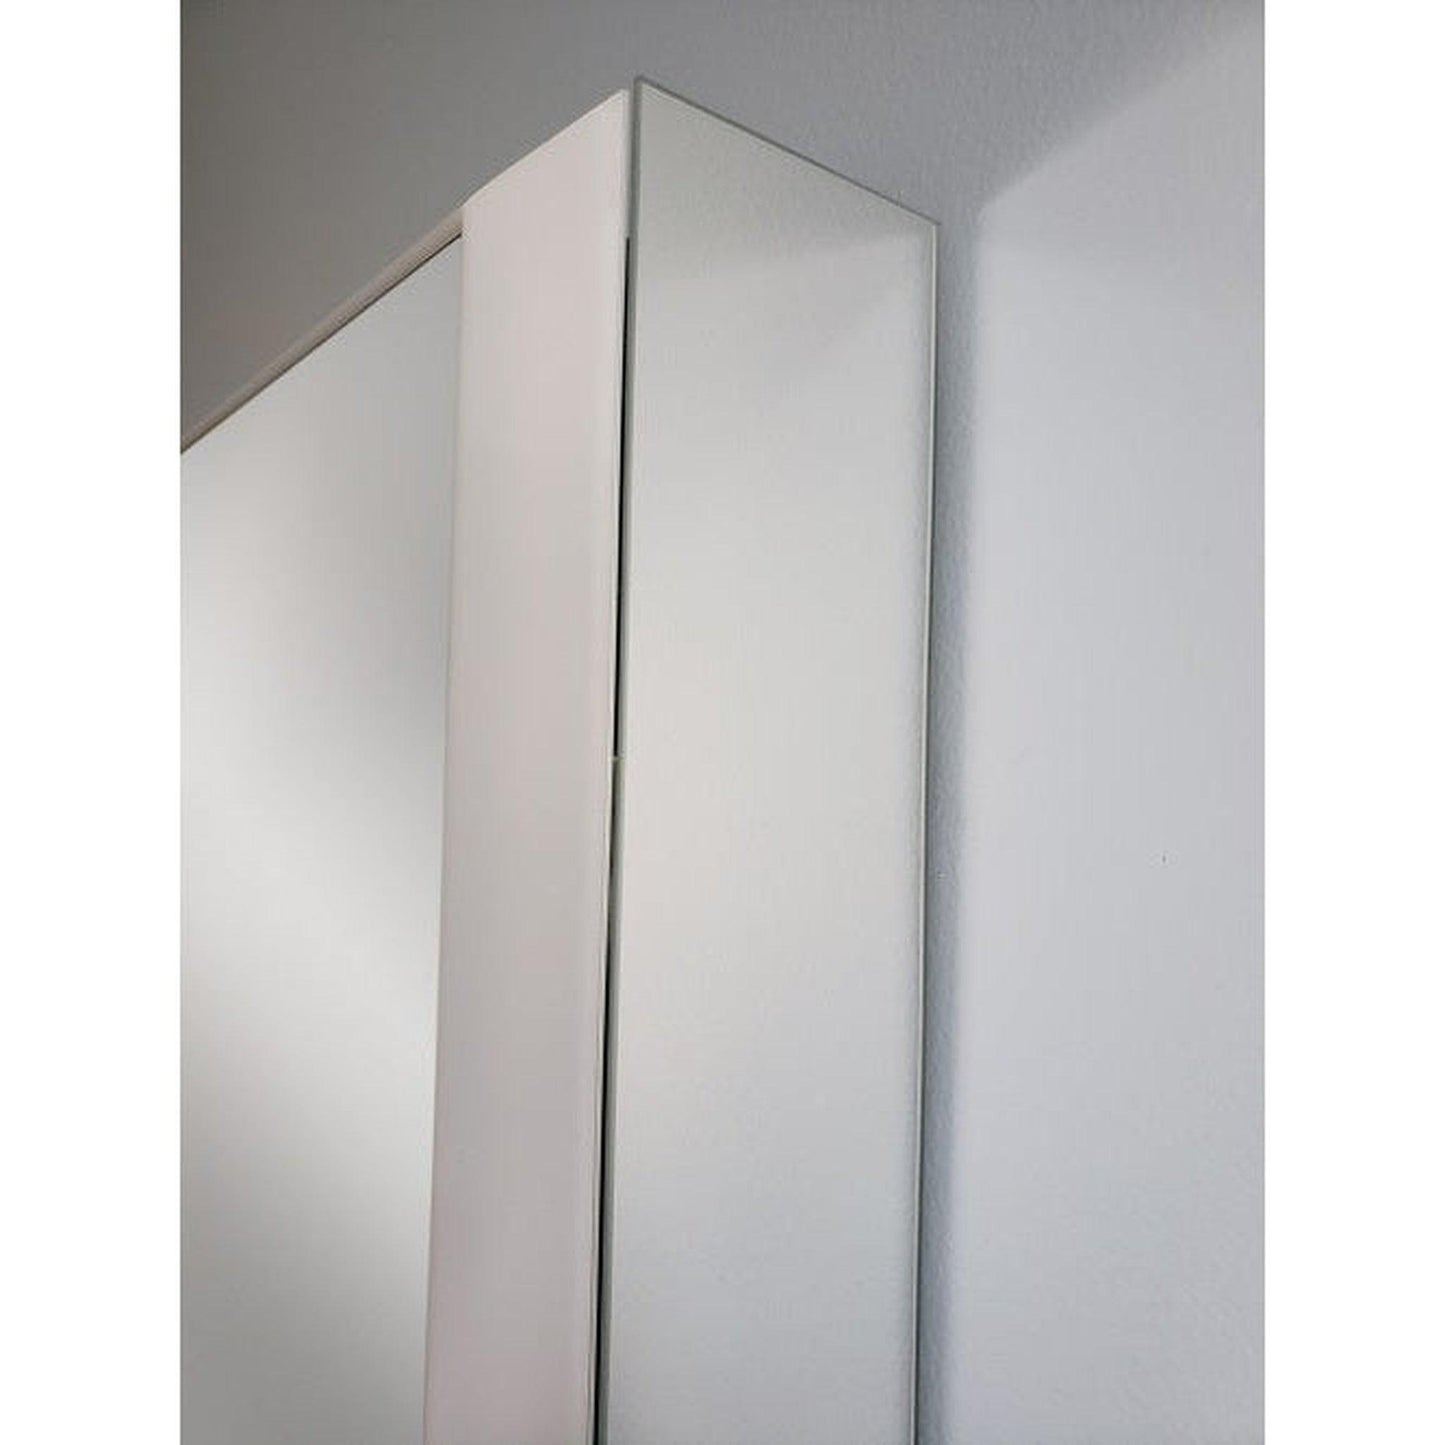 Sidler Quadro 47" x 36" 4000K 3 Mirror Doors Anodized Aluminum Medicine Cabinet With Night Light Function, Built-in GFCI Outlet and USB port